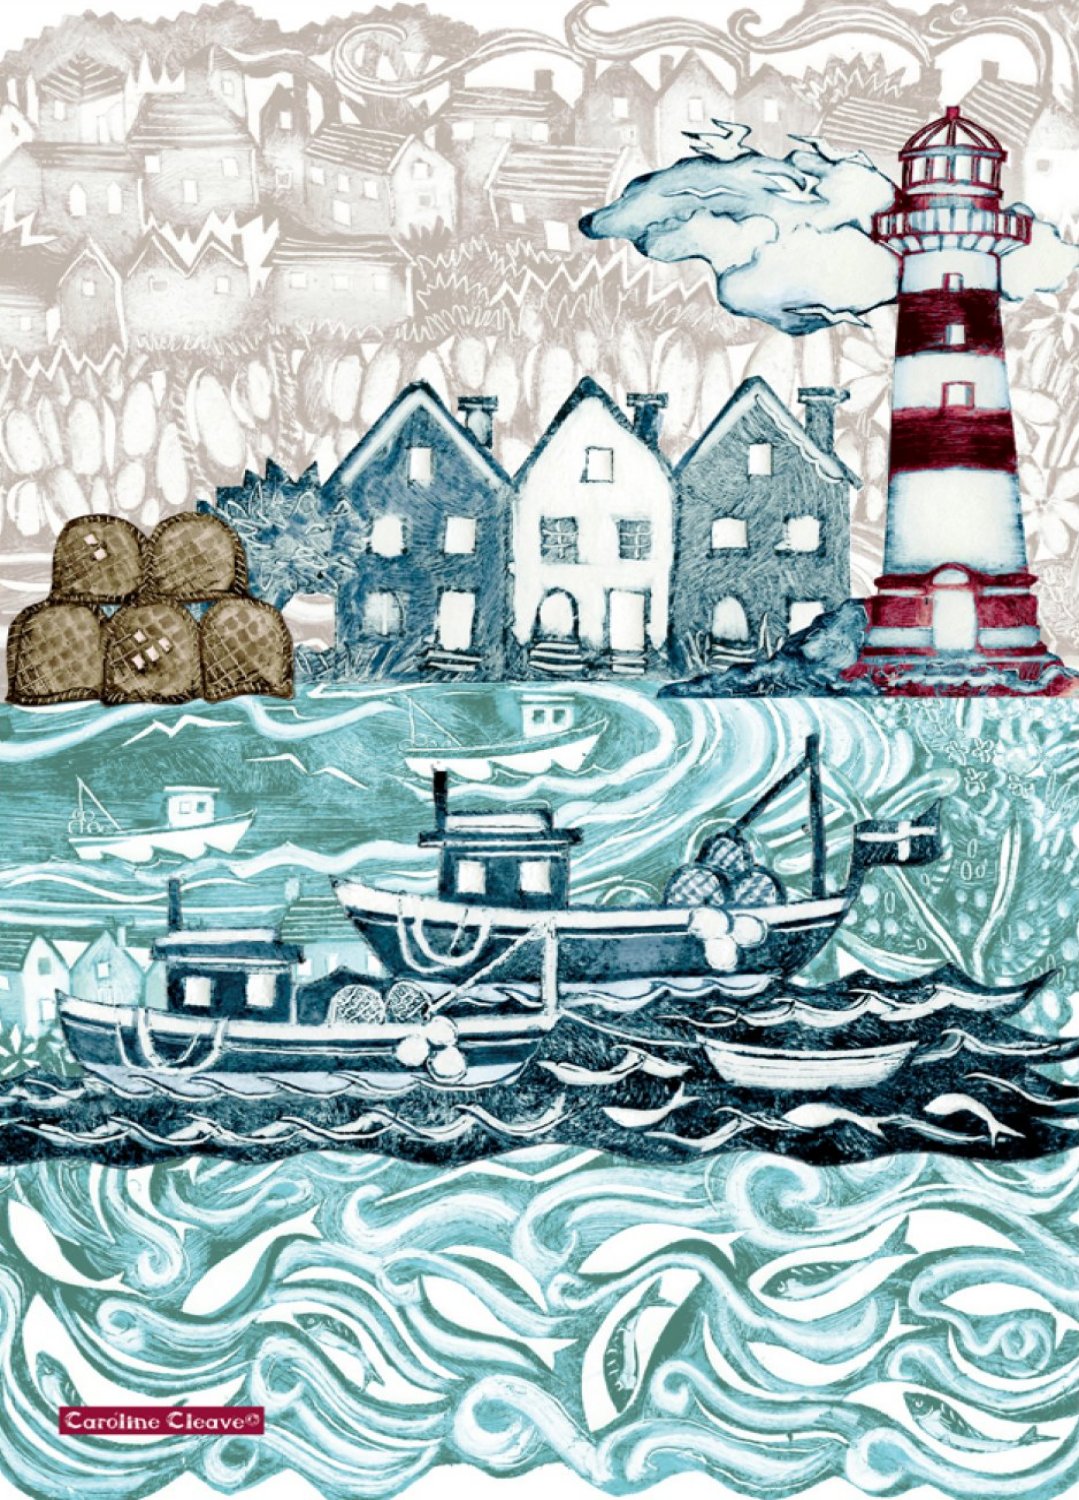 Emma Ball "Caroline Cleave Fishing Village Lighthouse", Pure cotton tea towel. Printed in the UK.